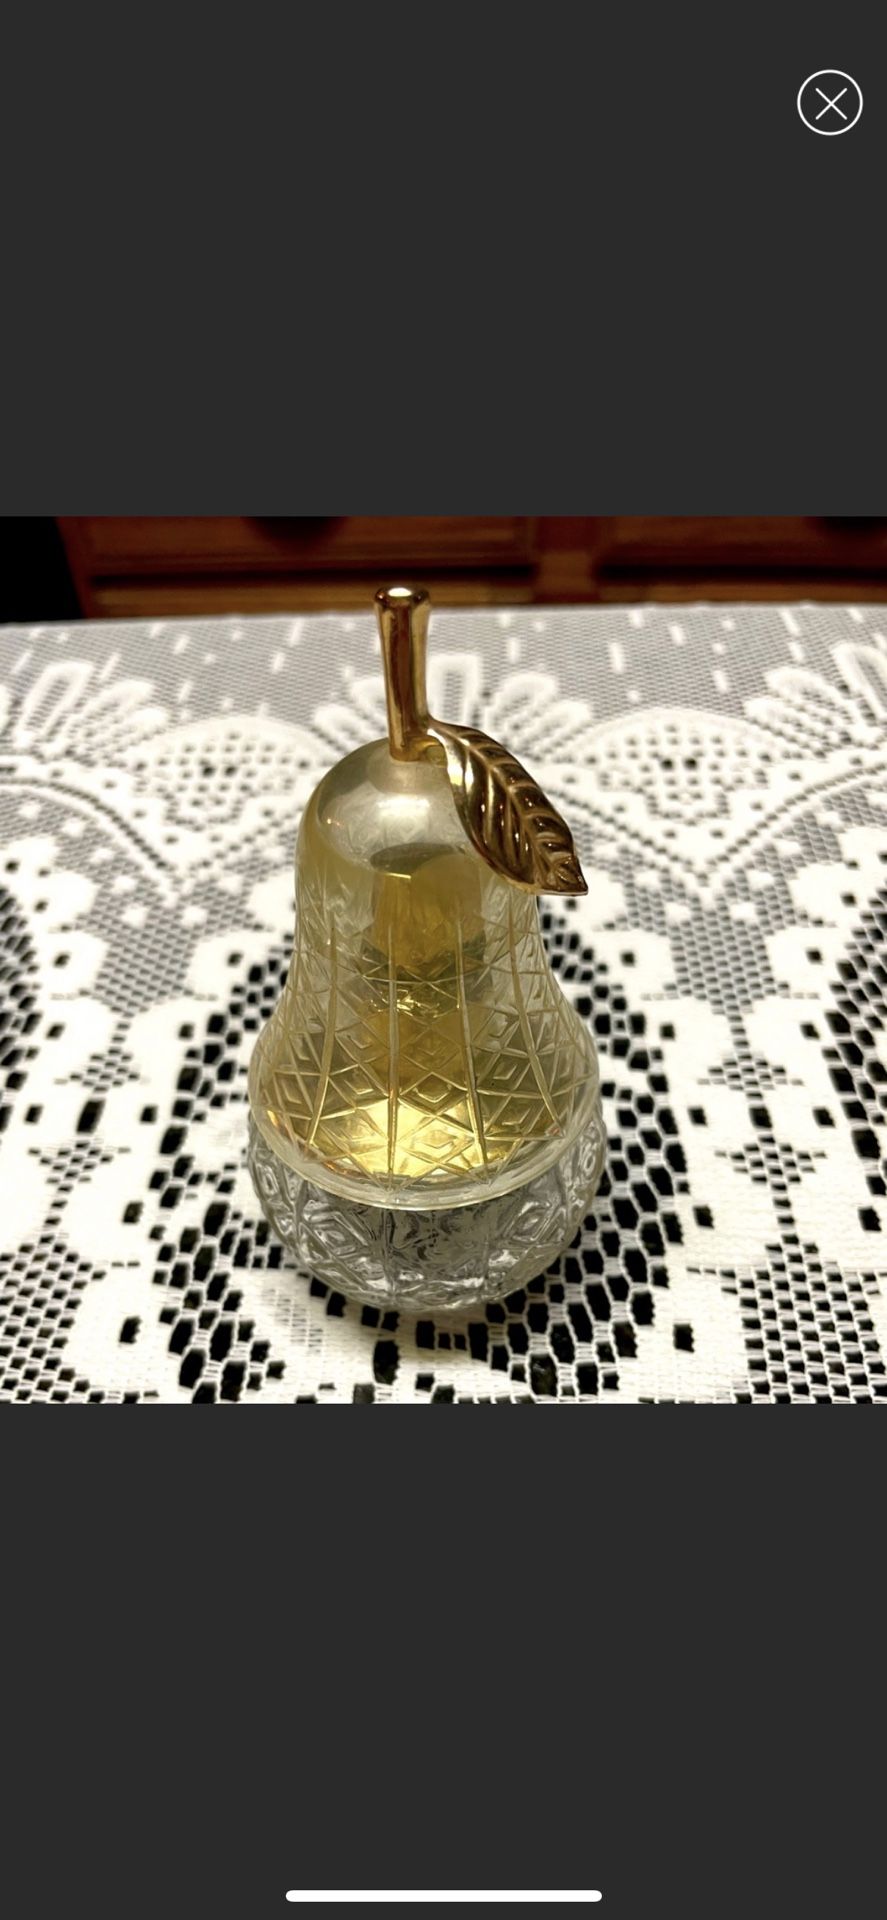 Vintage Avon Perfume Bottle in the Shape of a Pear